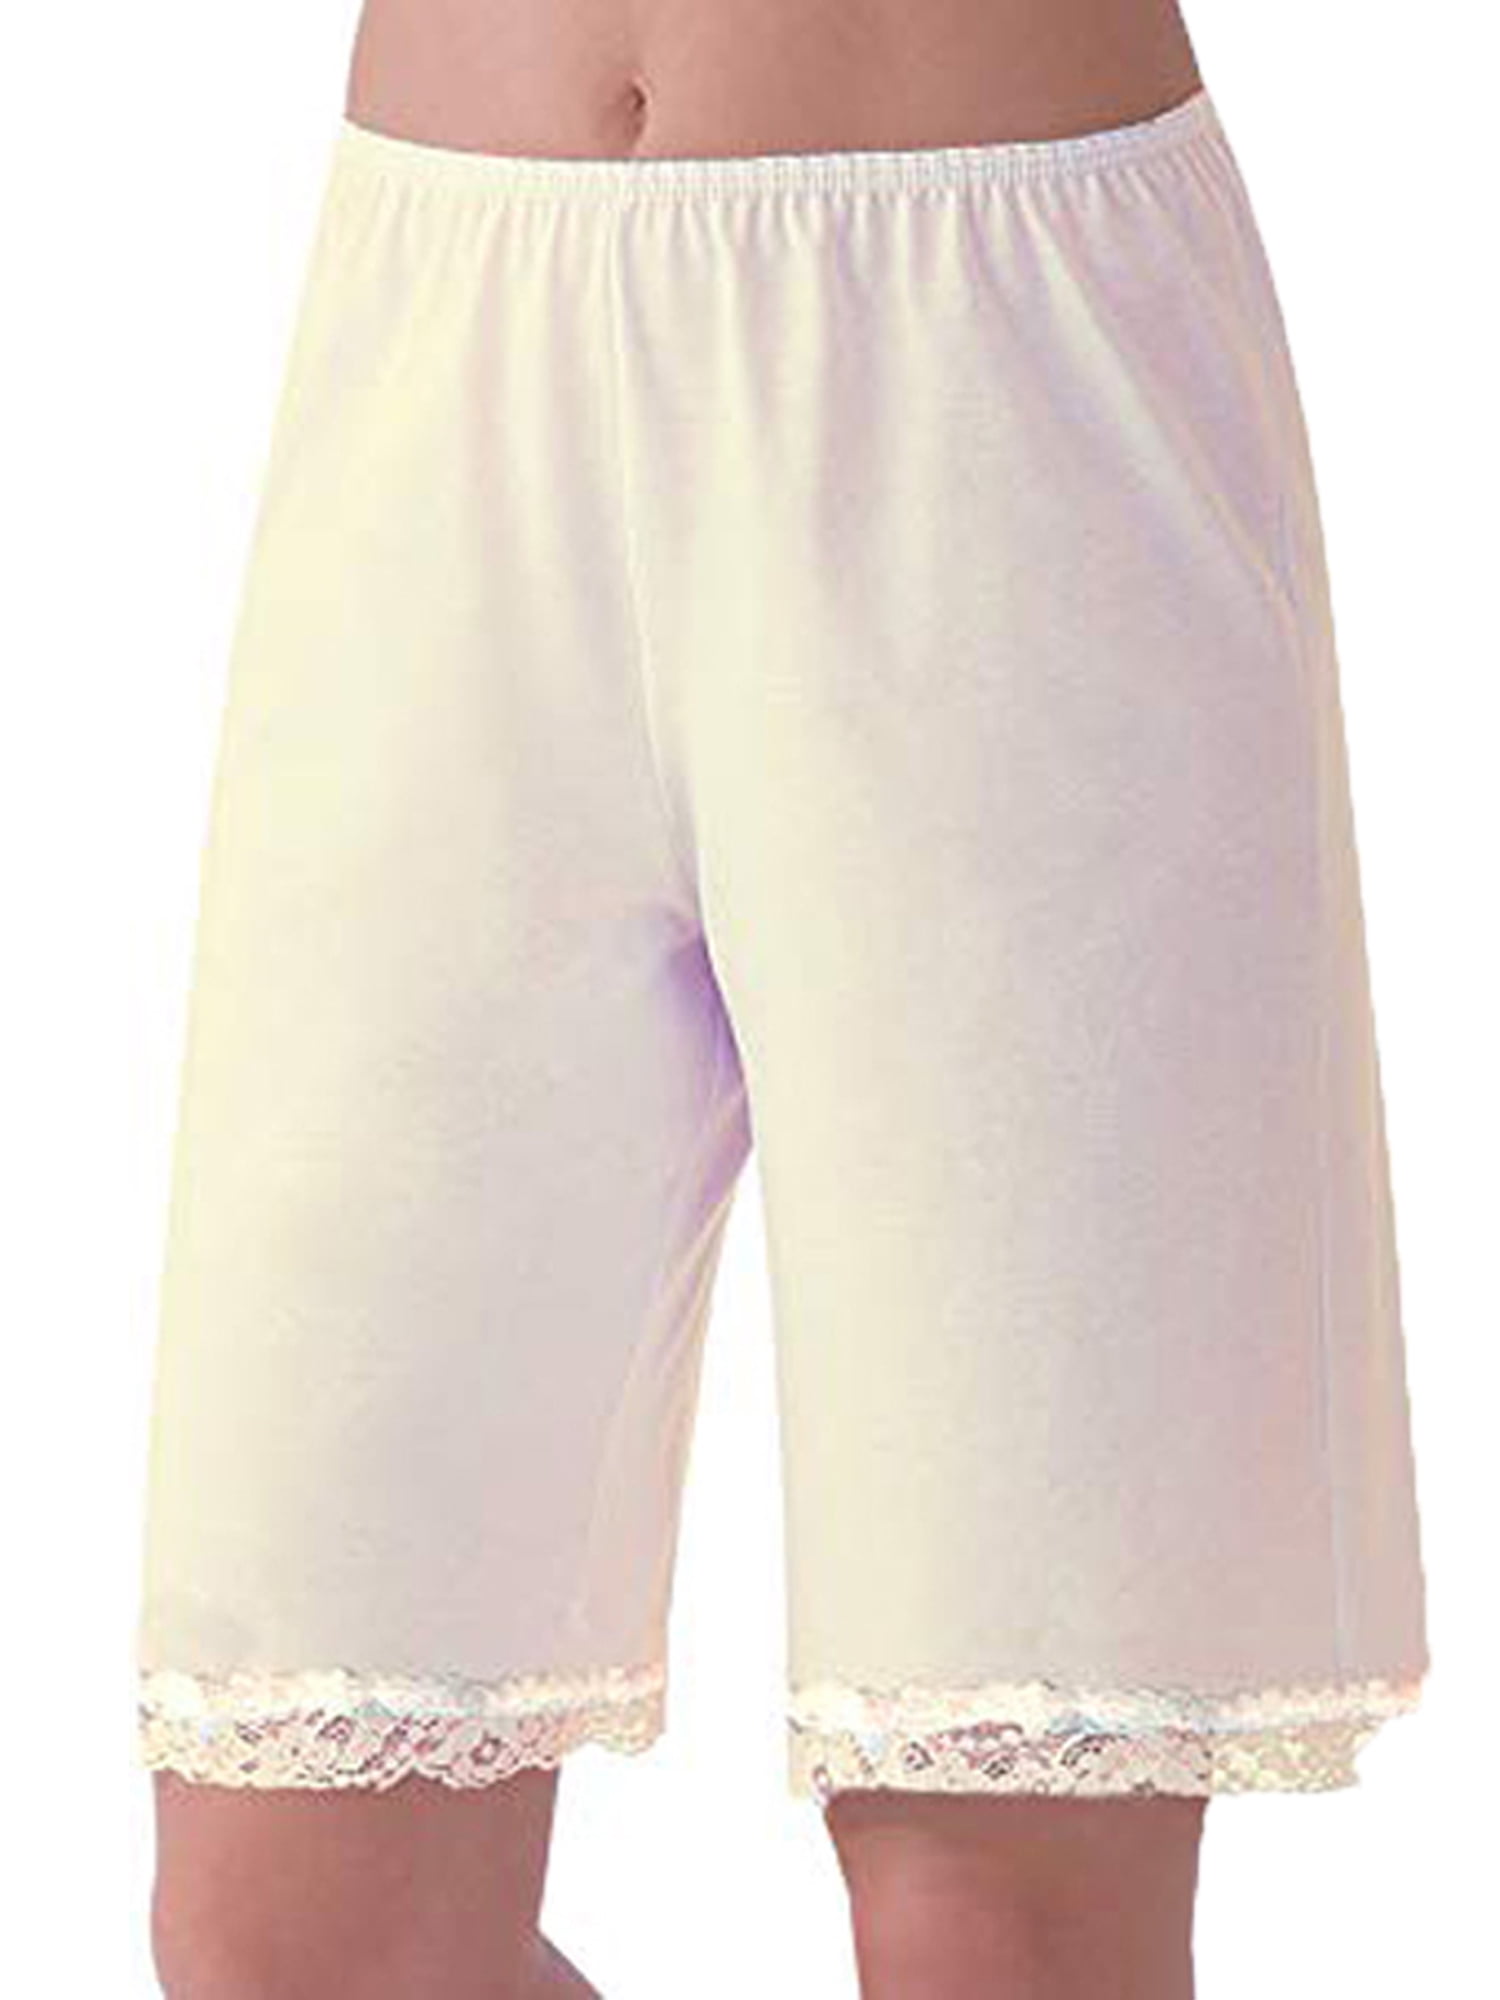 Womens Satin Lace Underwear Frilly Pettipants Bloomers Half Slip Short Pants  US